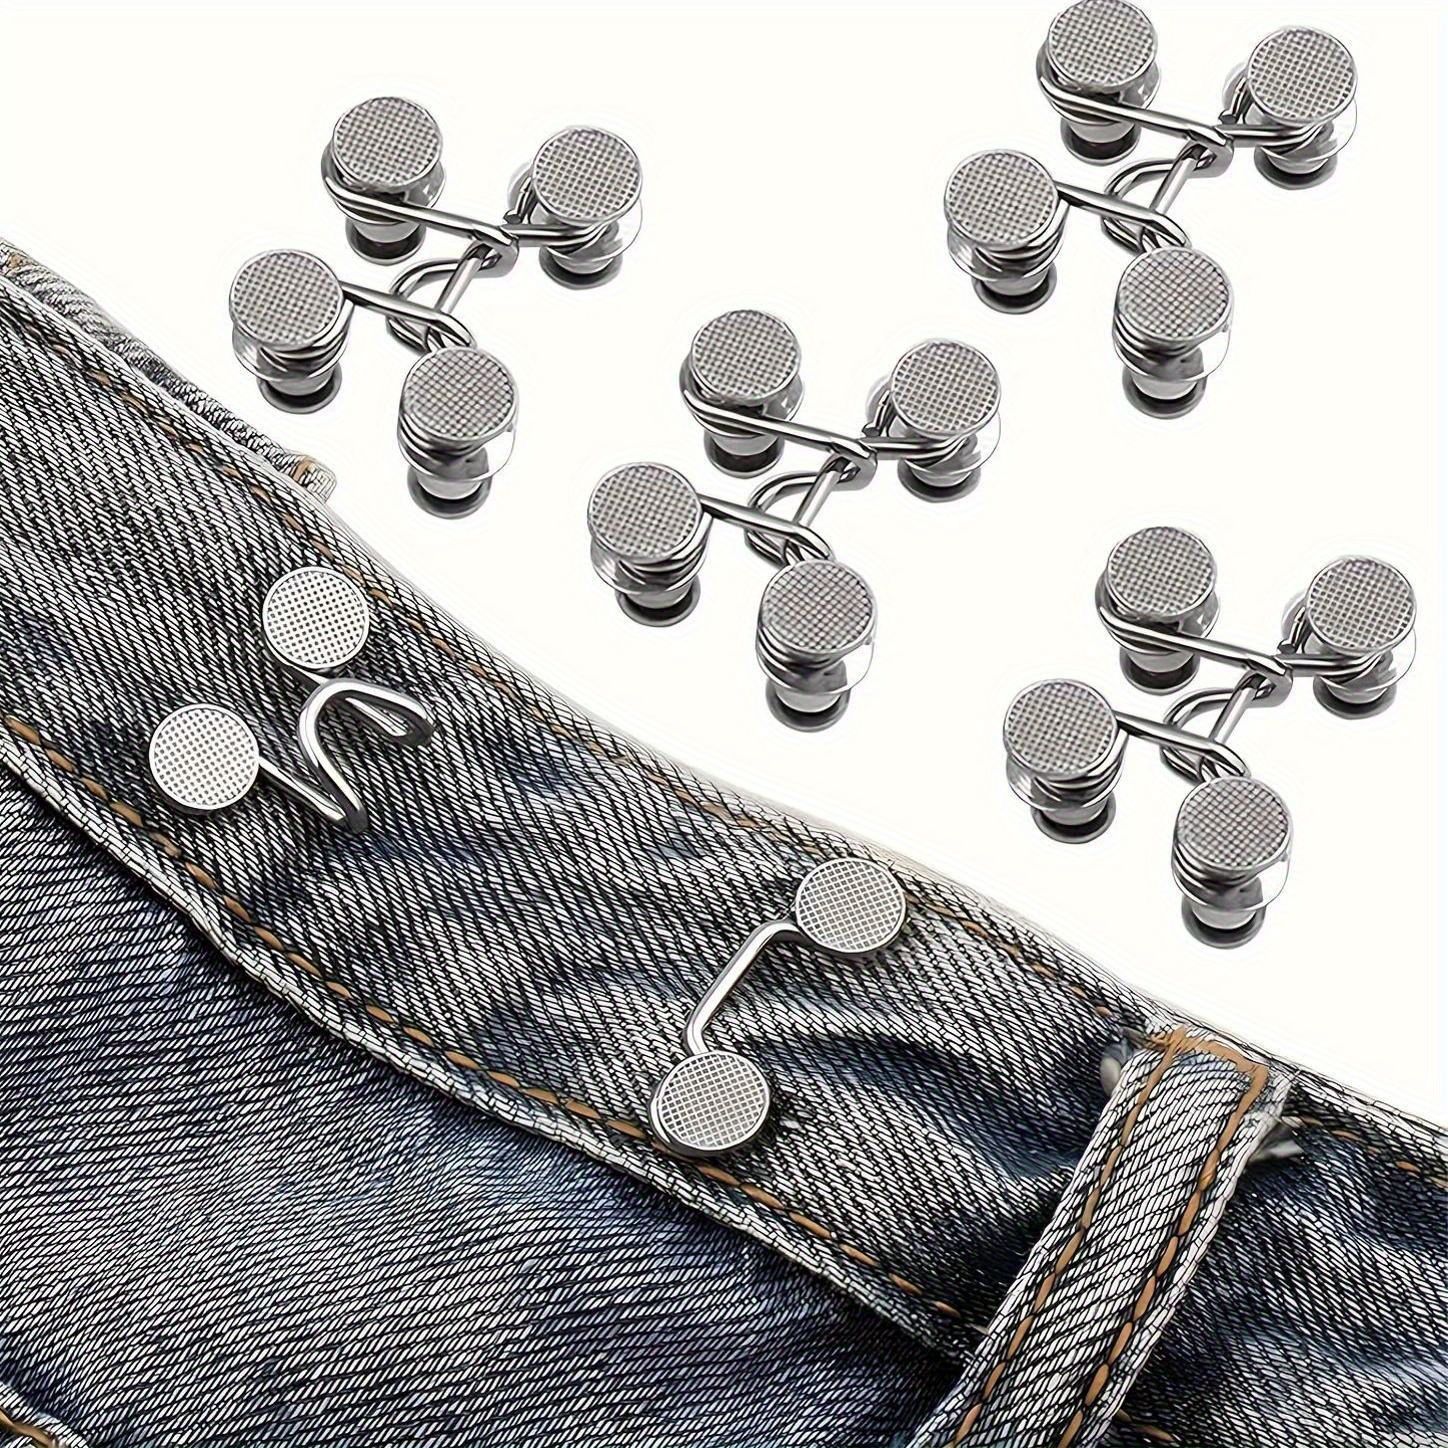 

4-pack Silvery Jeans Waist Tightener Buttons - No-sew Adjustable Denim Waistband Reducer, Easy Install For Women's Pants Pant Waist Tightener Button Extender For Pants